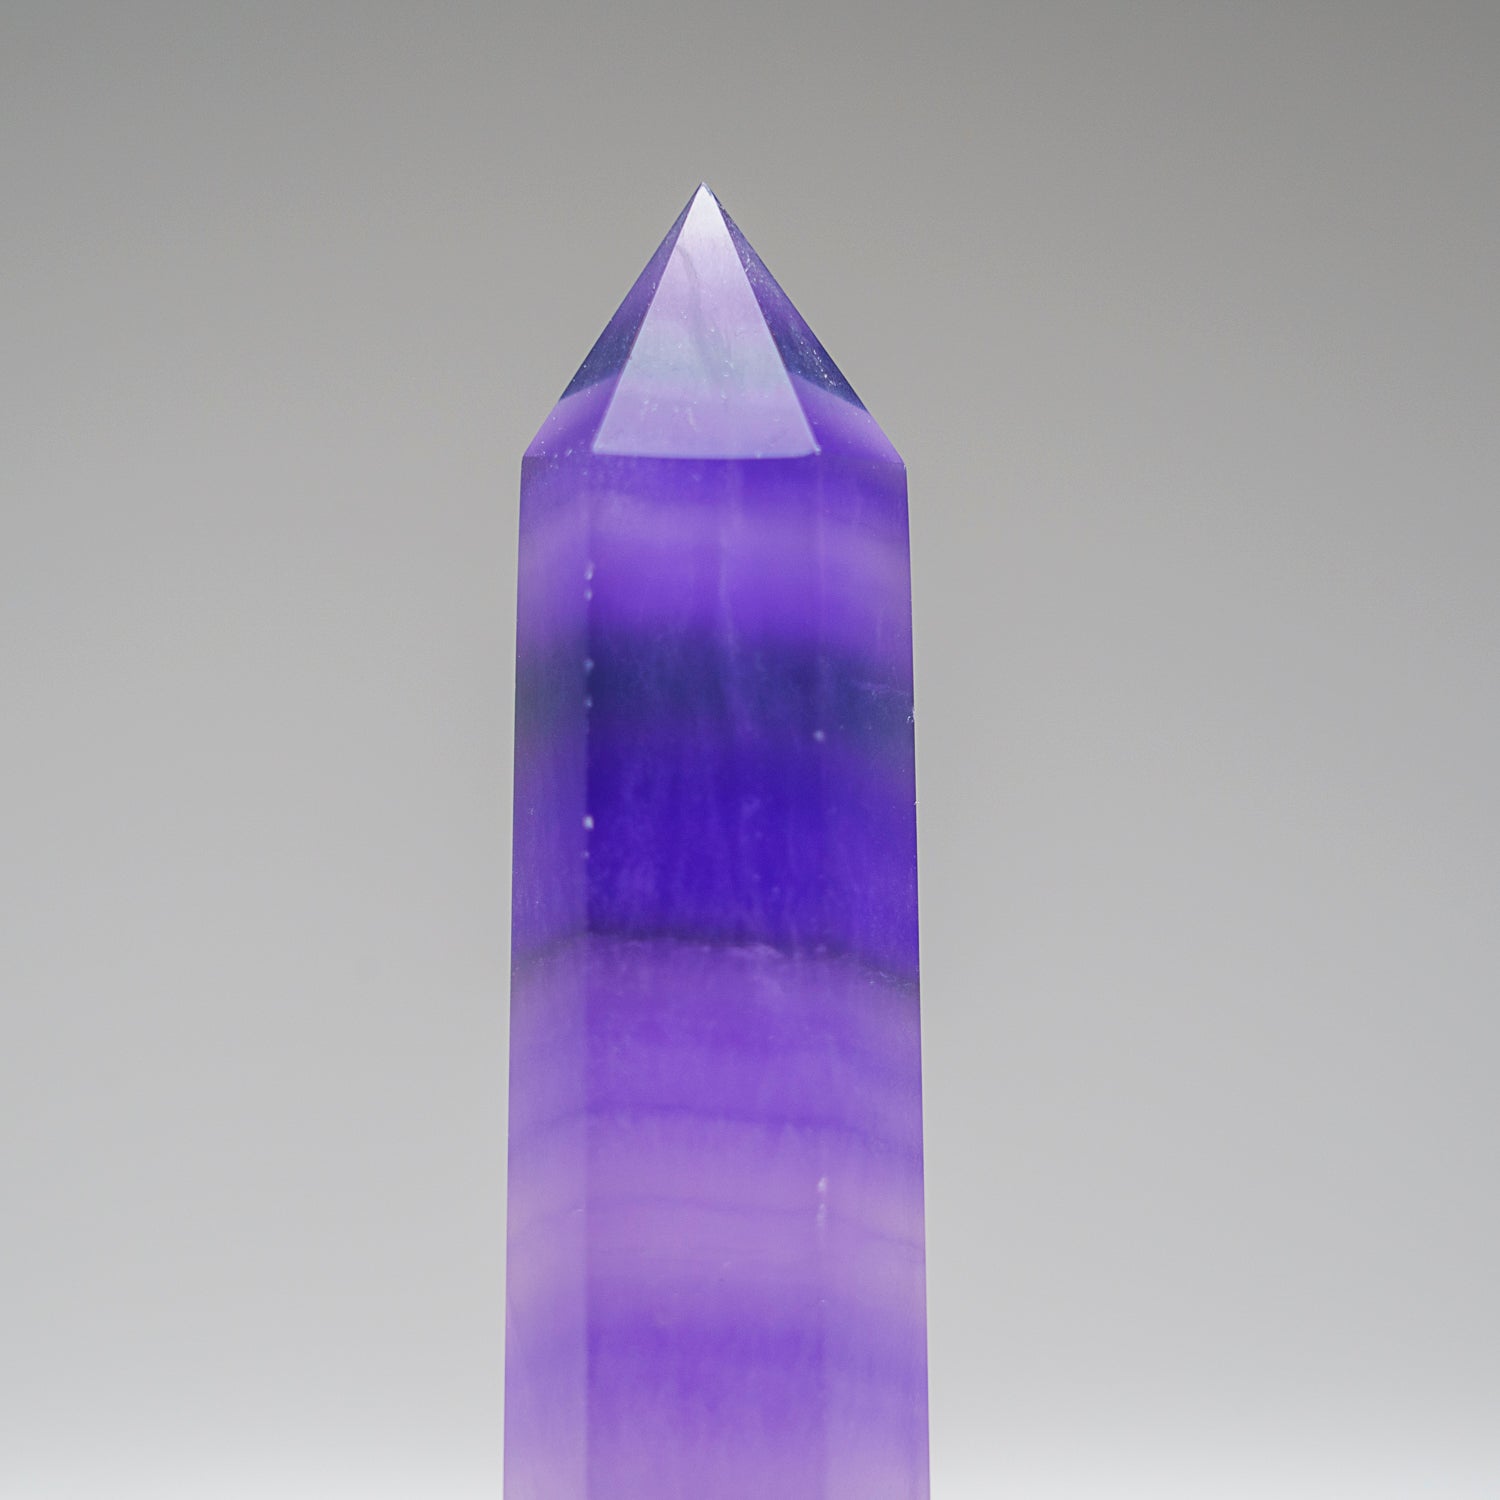 Genuine Polished Purple Fluorite Point from China (102 grams)